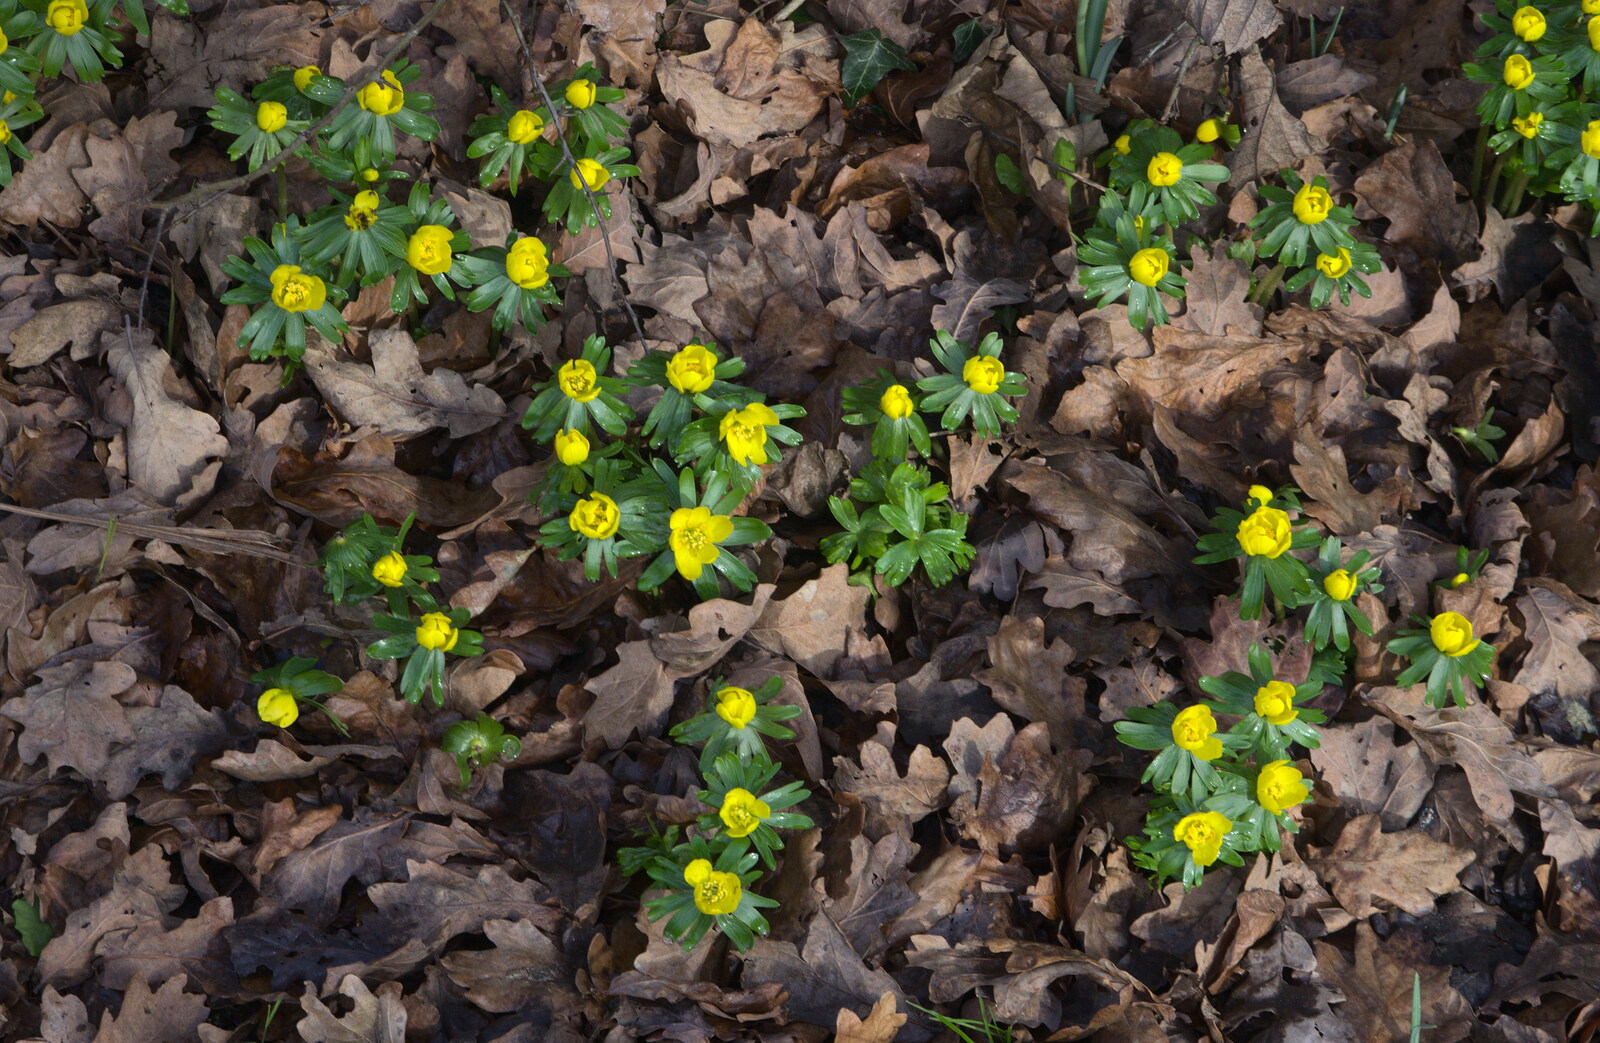 Yellow flowers poke up through a carpet of leaves from A Winter's Walk, Thrandeston, Suffolk - 5th February 2017